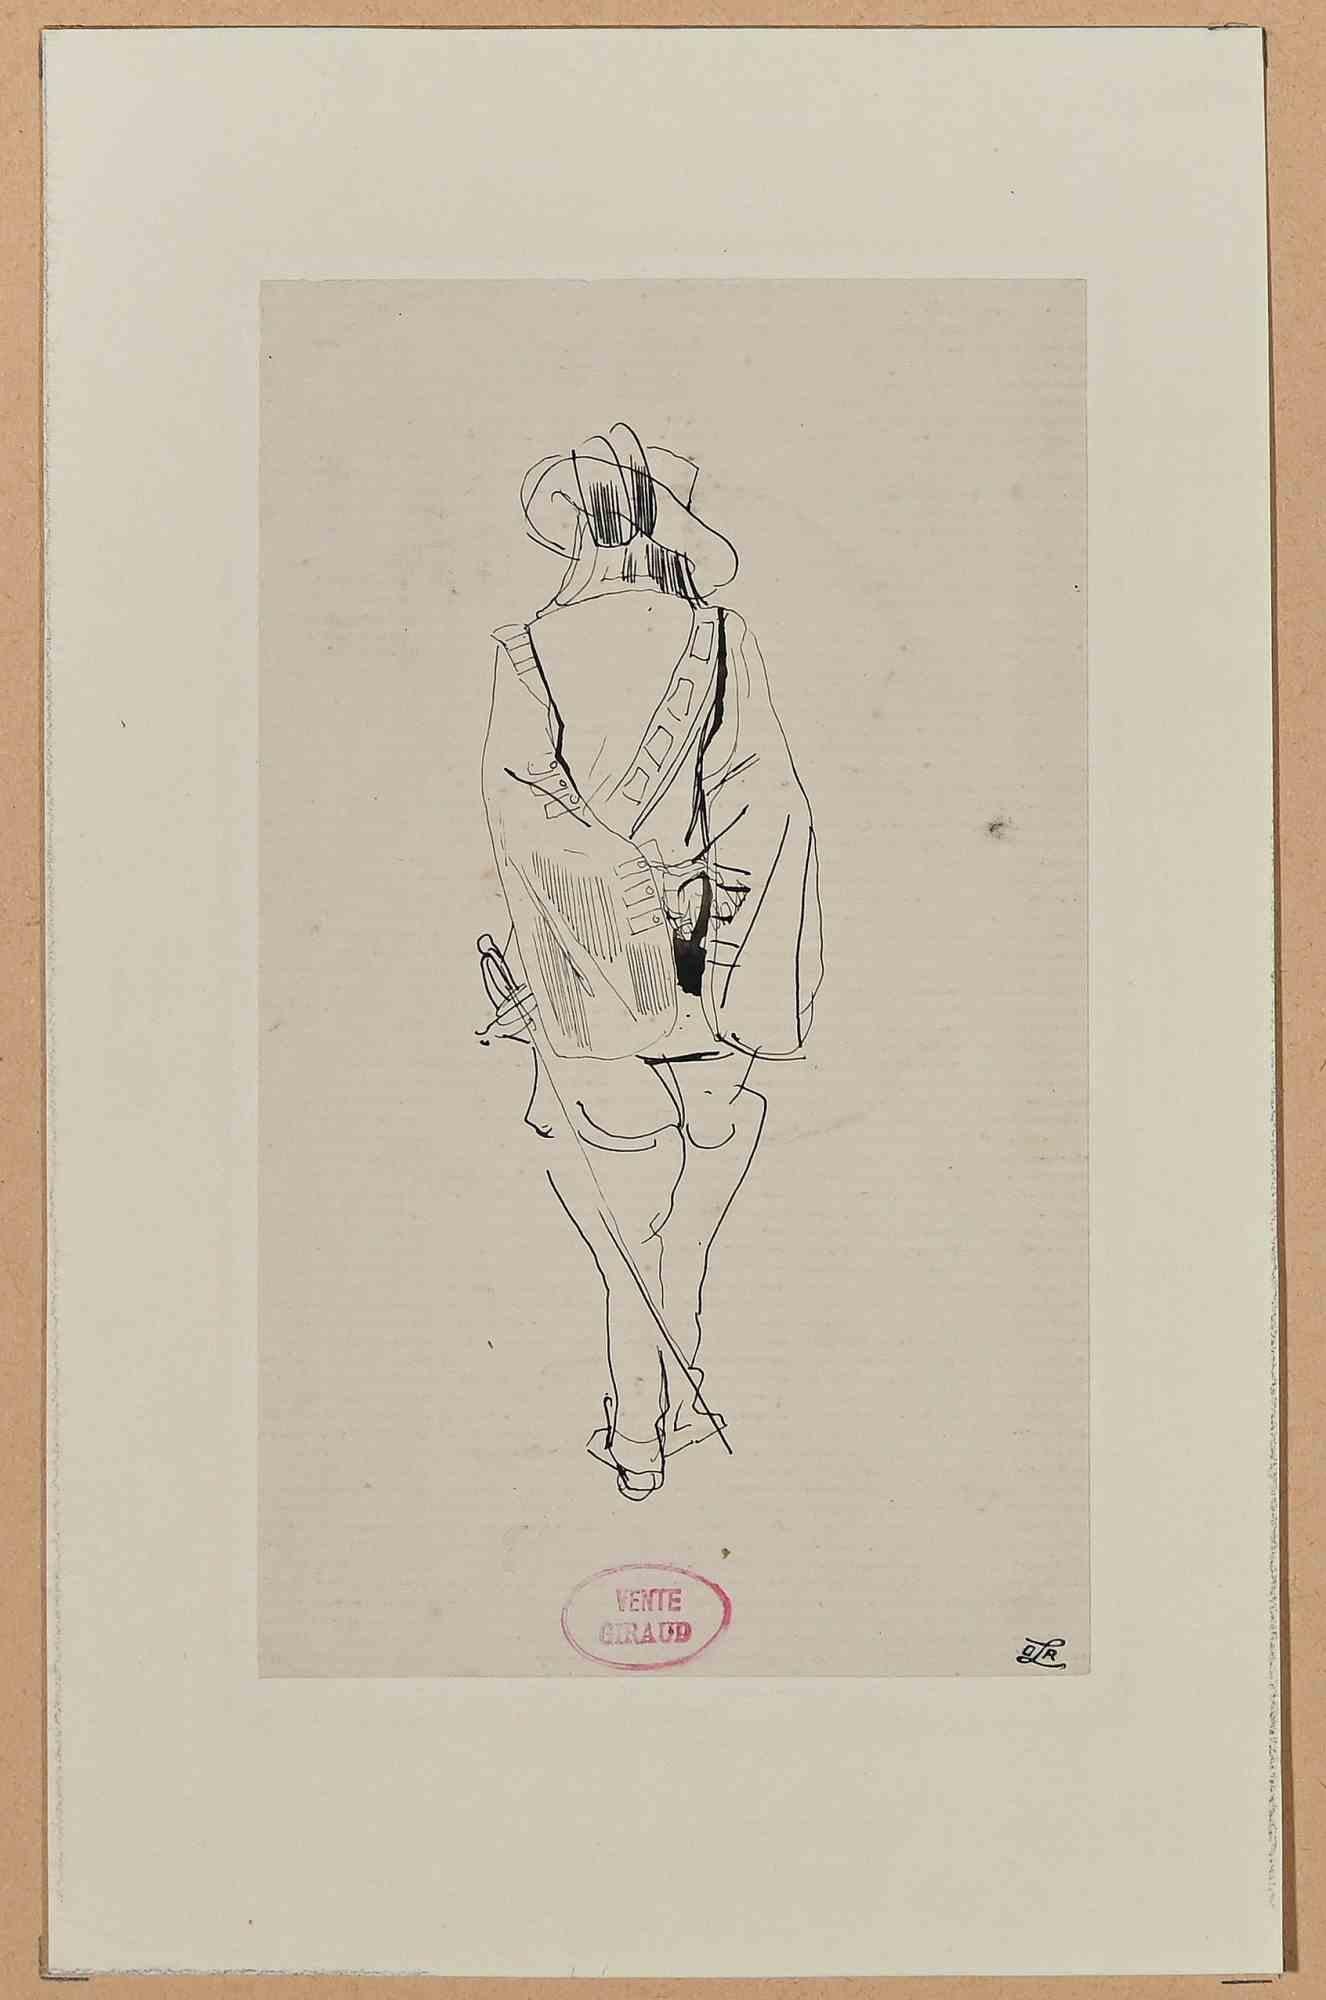 Musketeer from Behind- Drawing on Paper by E. Giraud - Late 19th Century - Art by Eugène Giraud